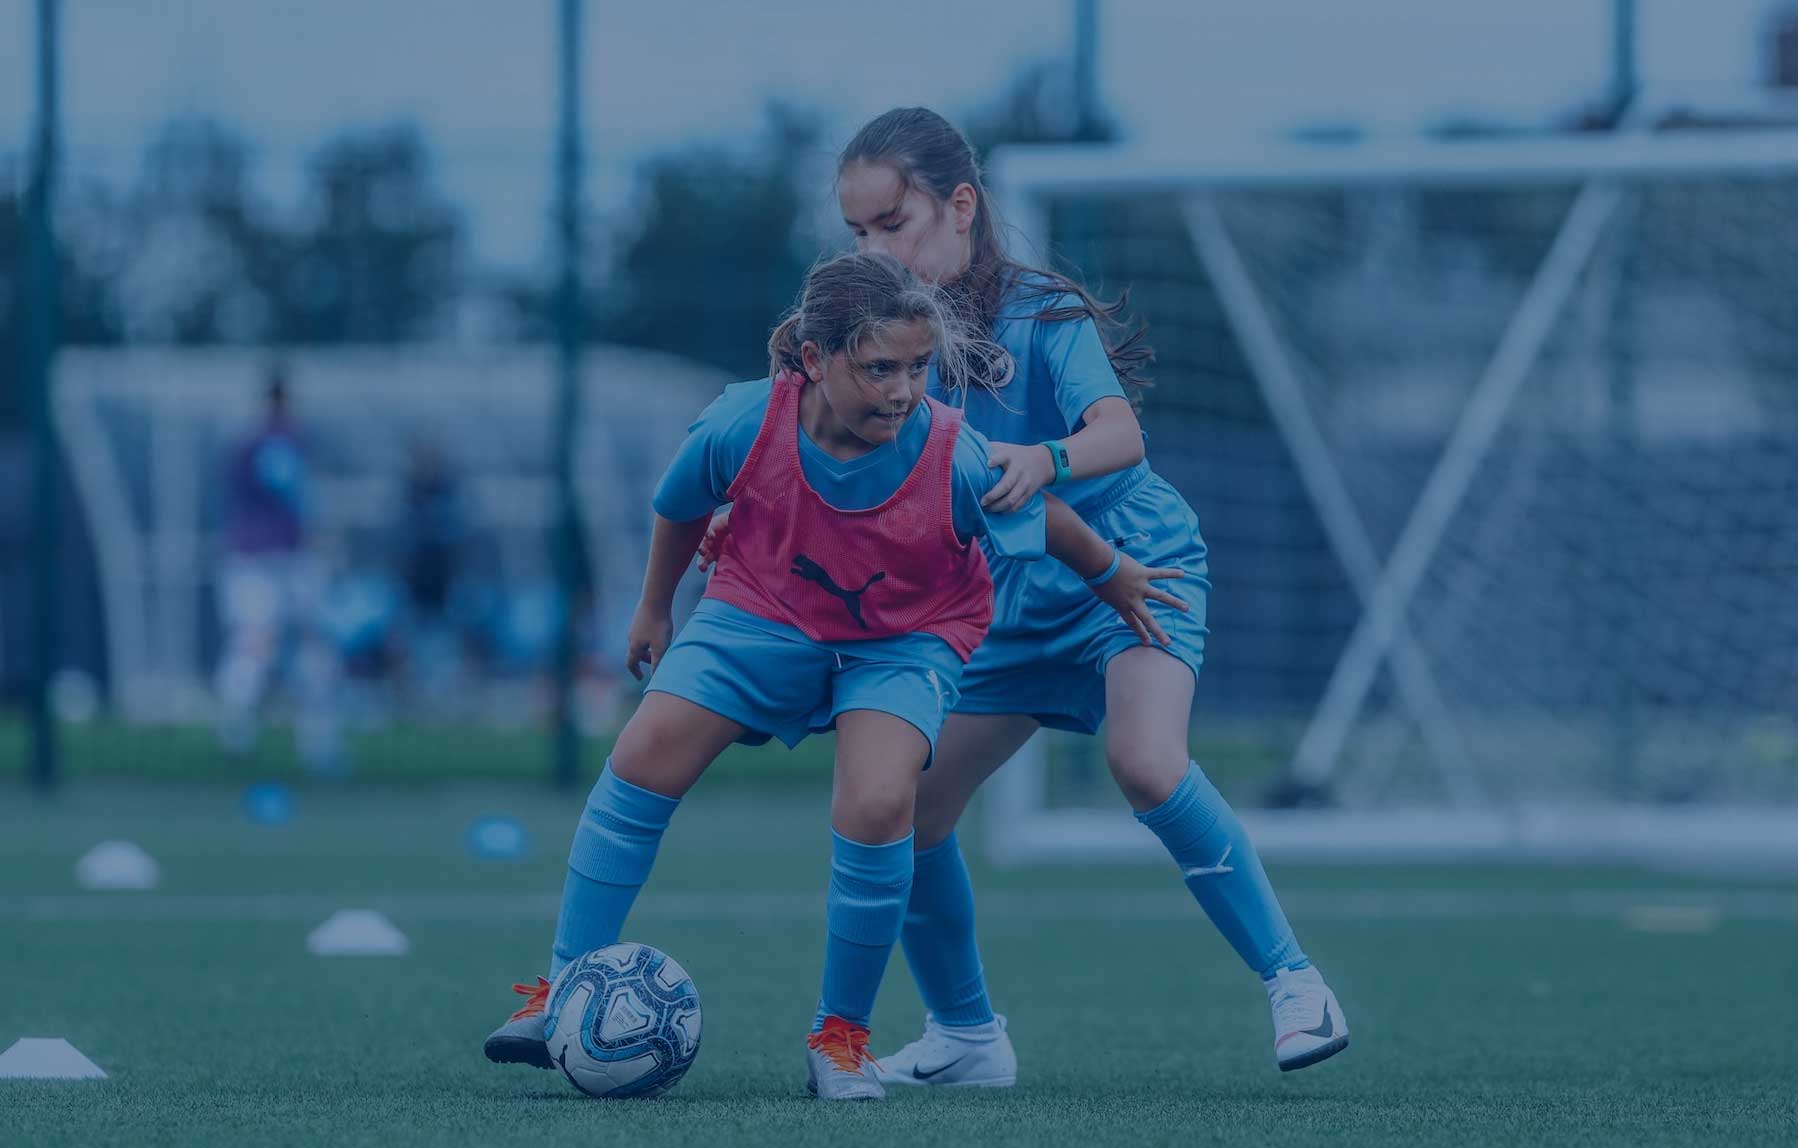 Two young girls in the Football Development Program at Manchester City Football School. The first girl is wearing a red bib and is in possession of the football while the second girl is behind her.